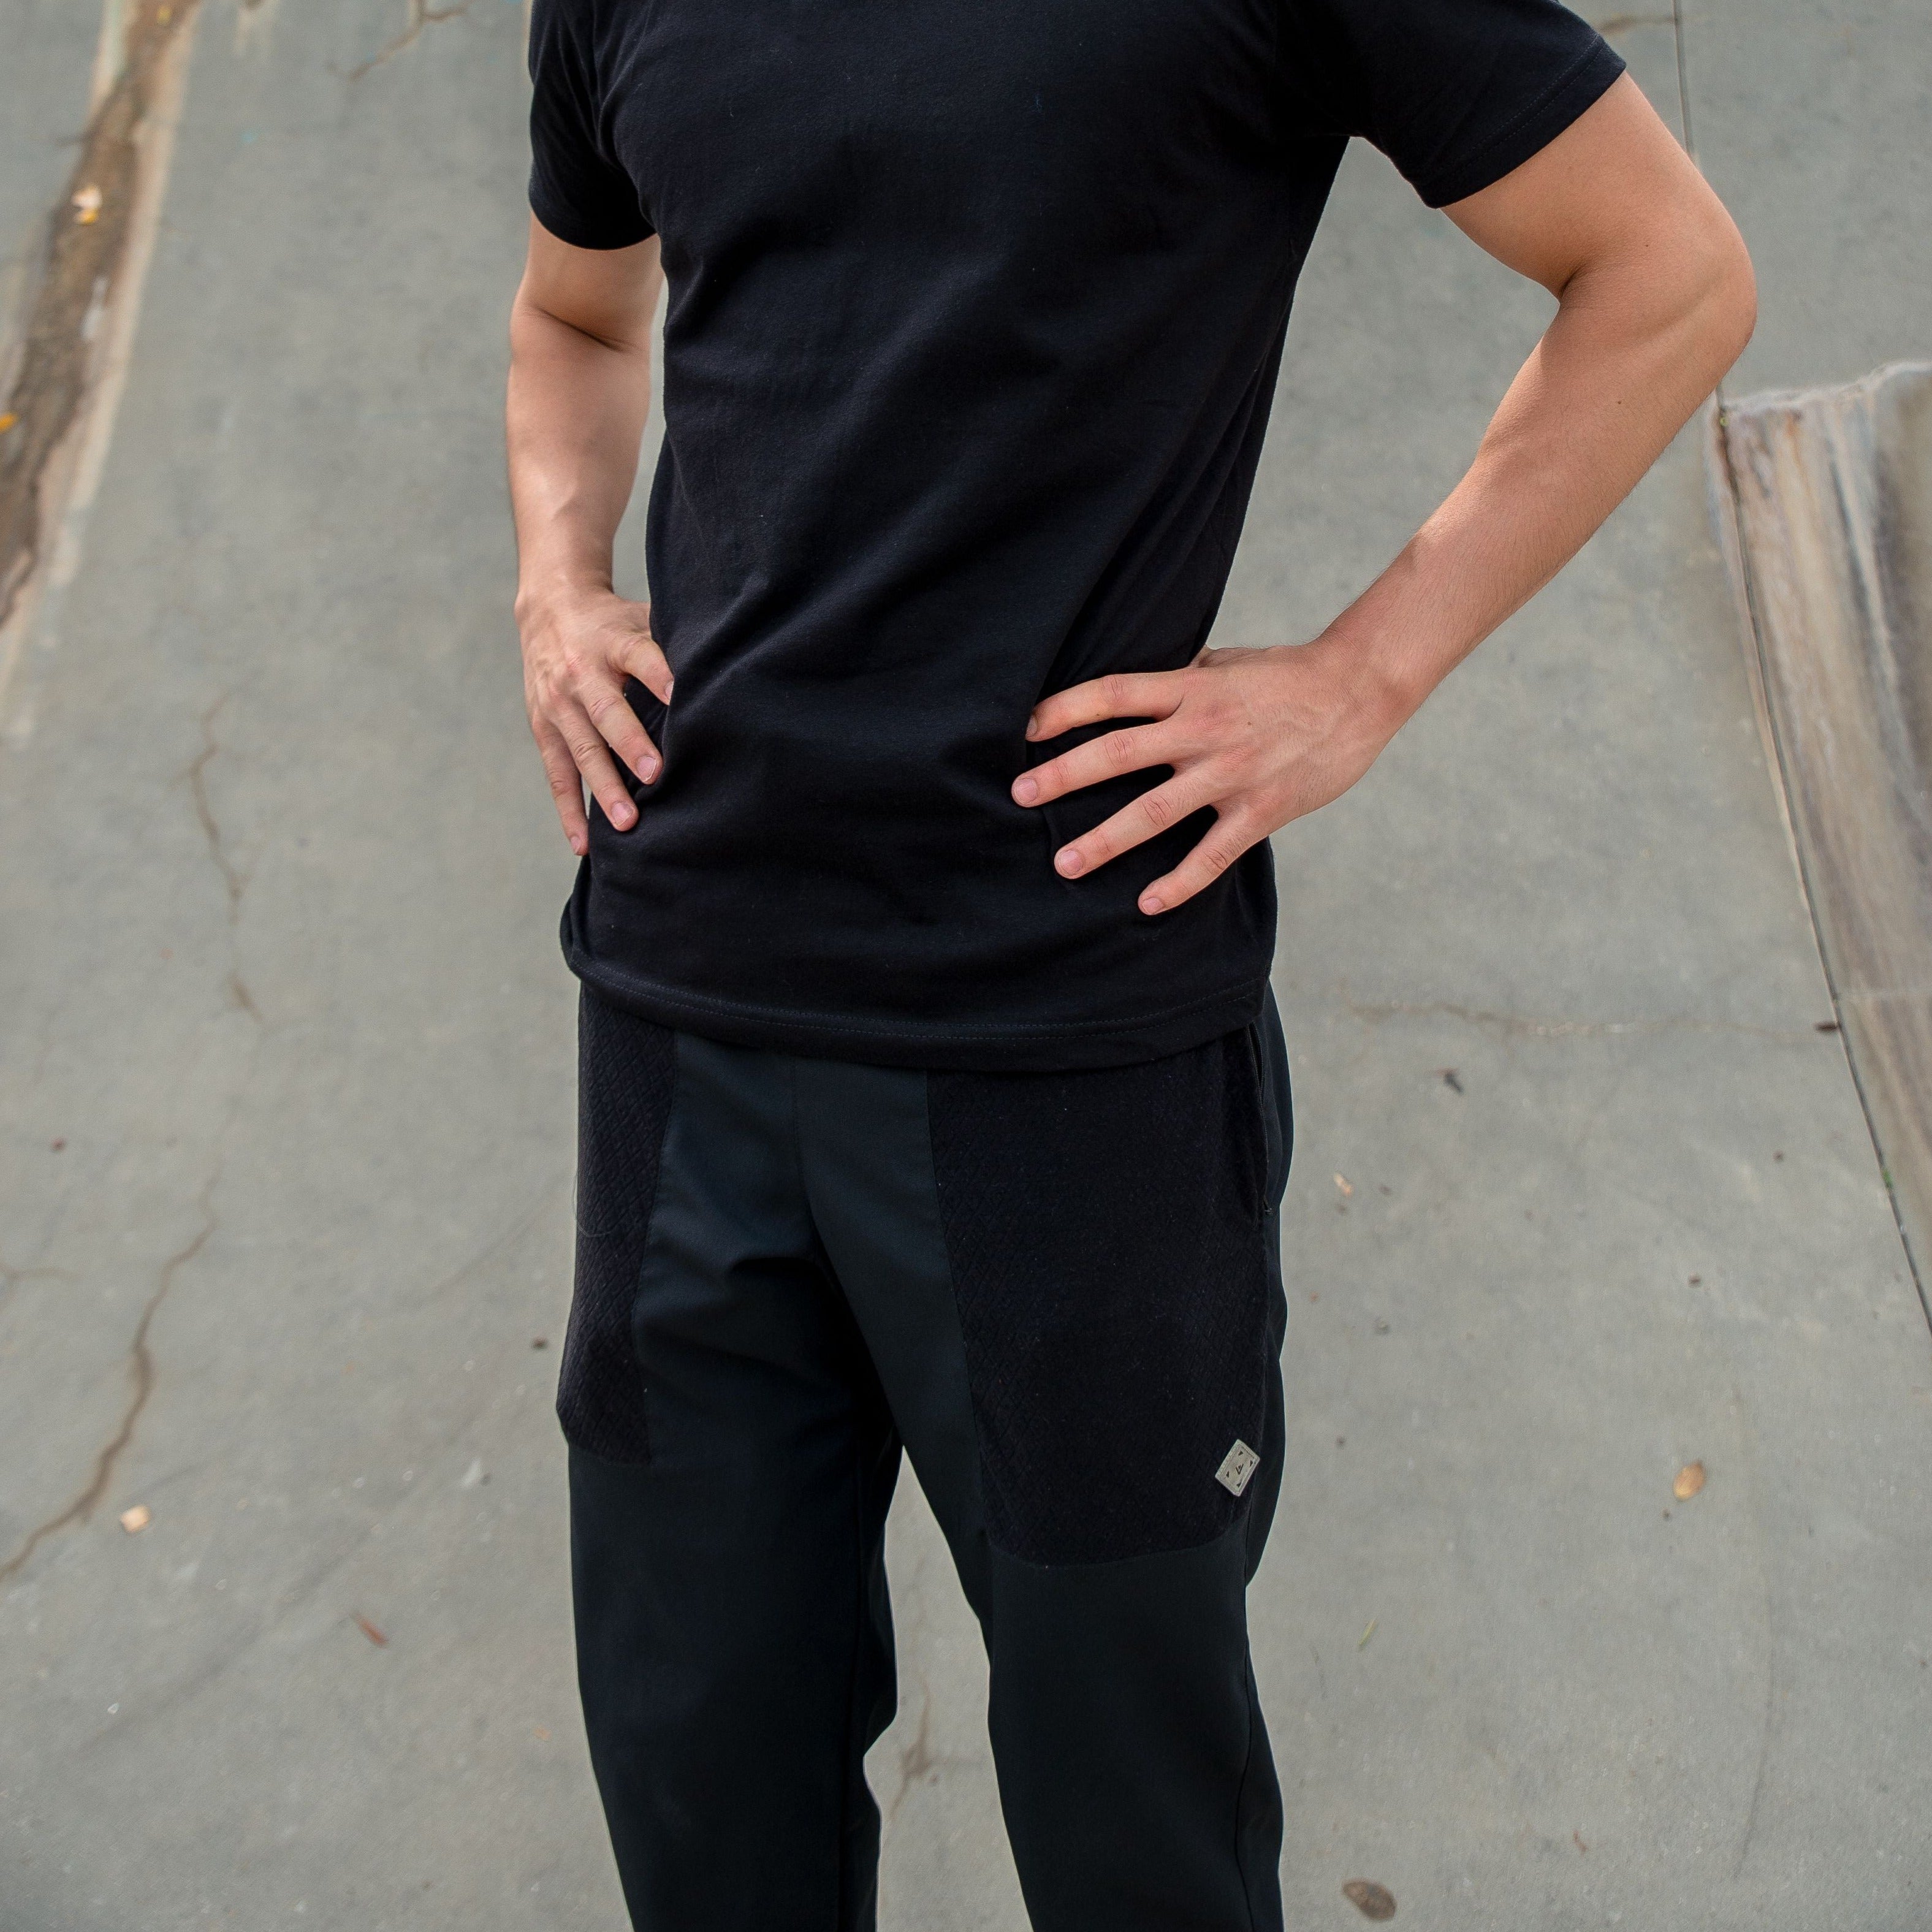 Hearthstone POINT3 DRYV® Black Joggers - Model View